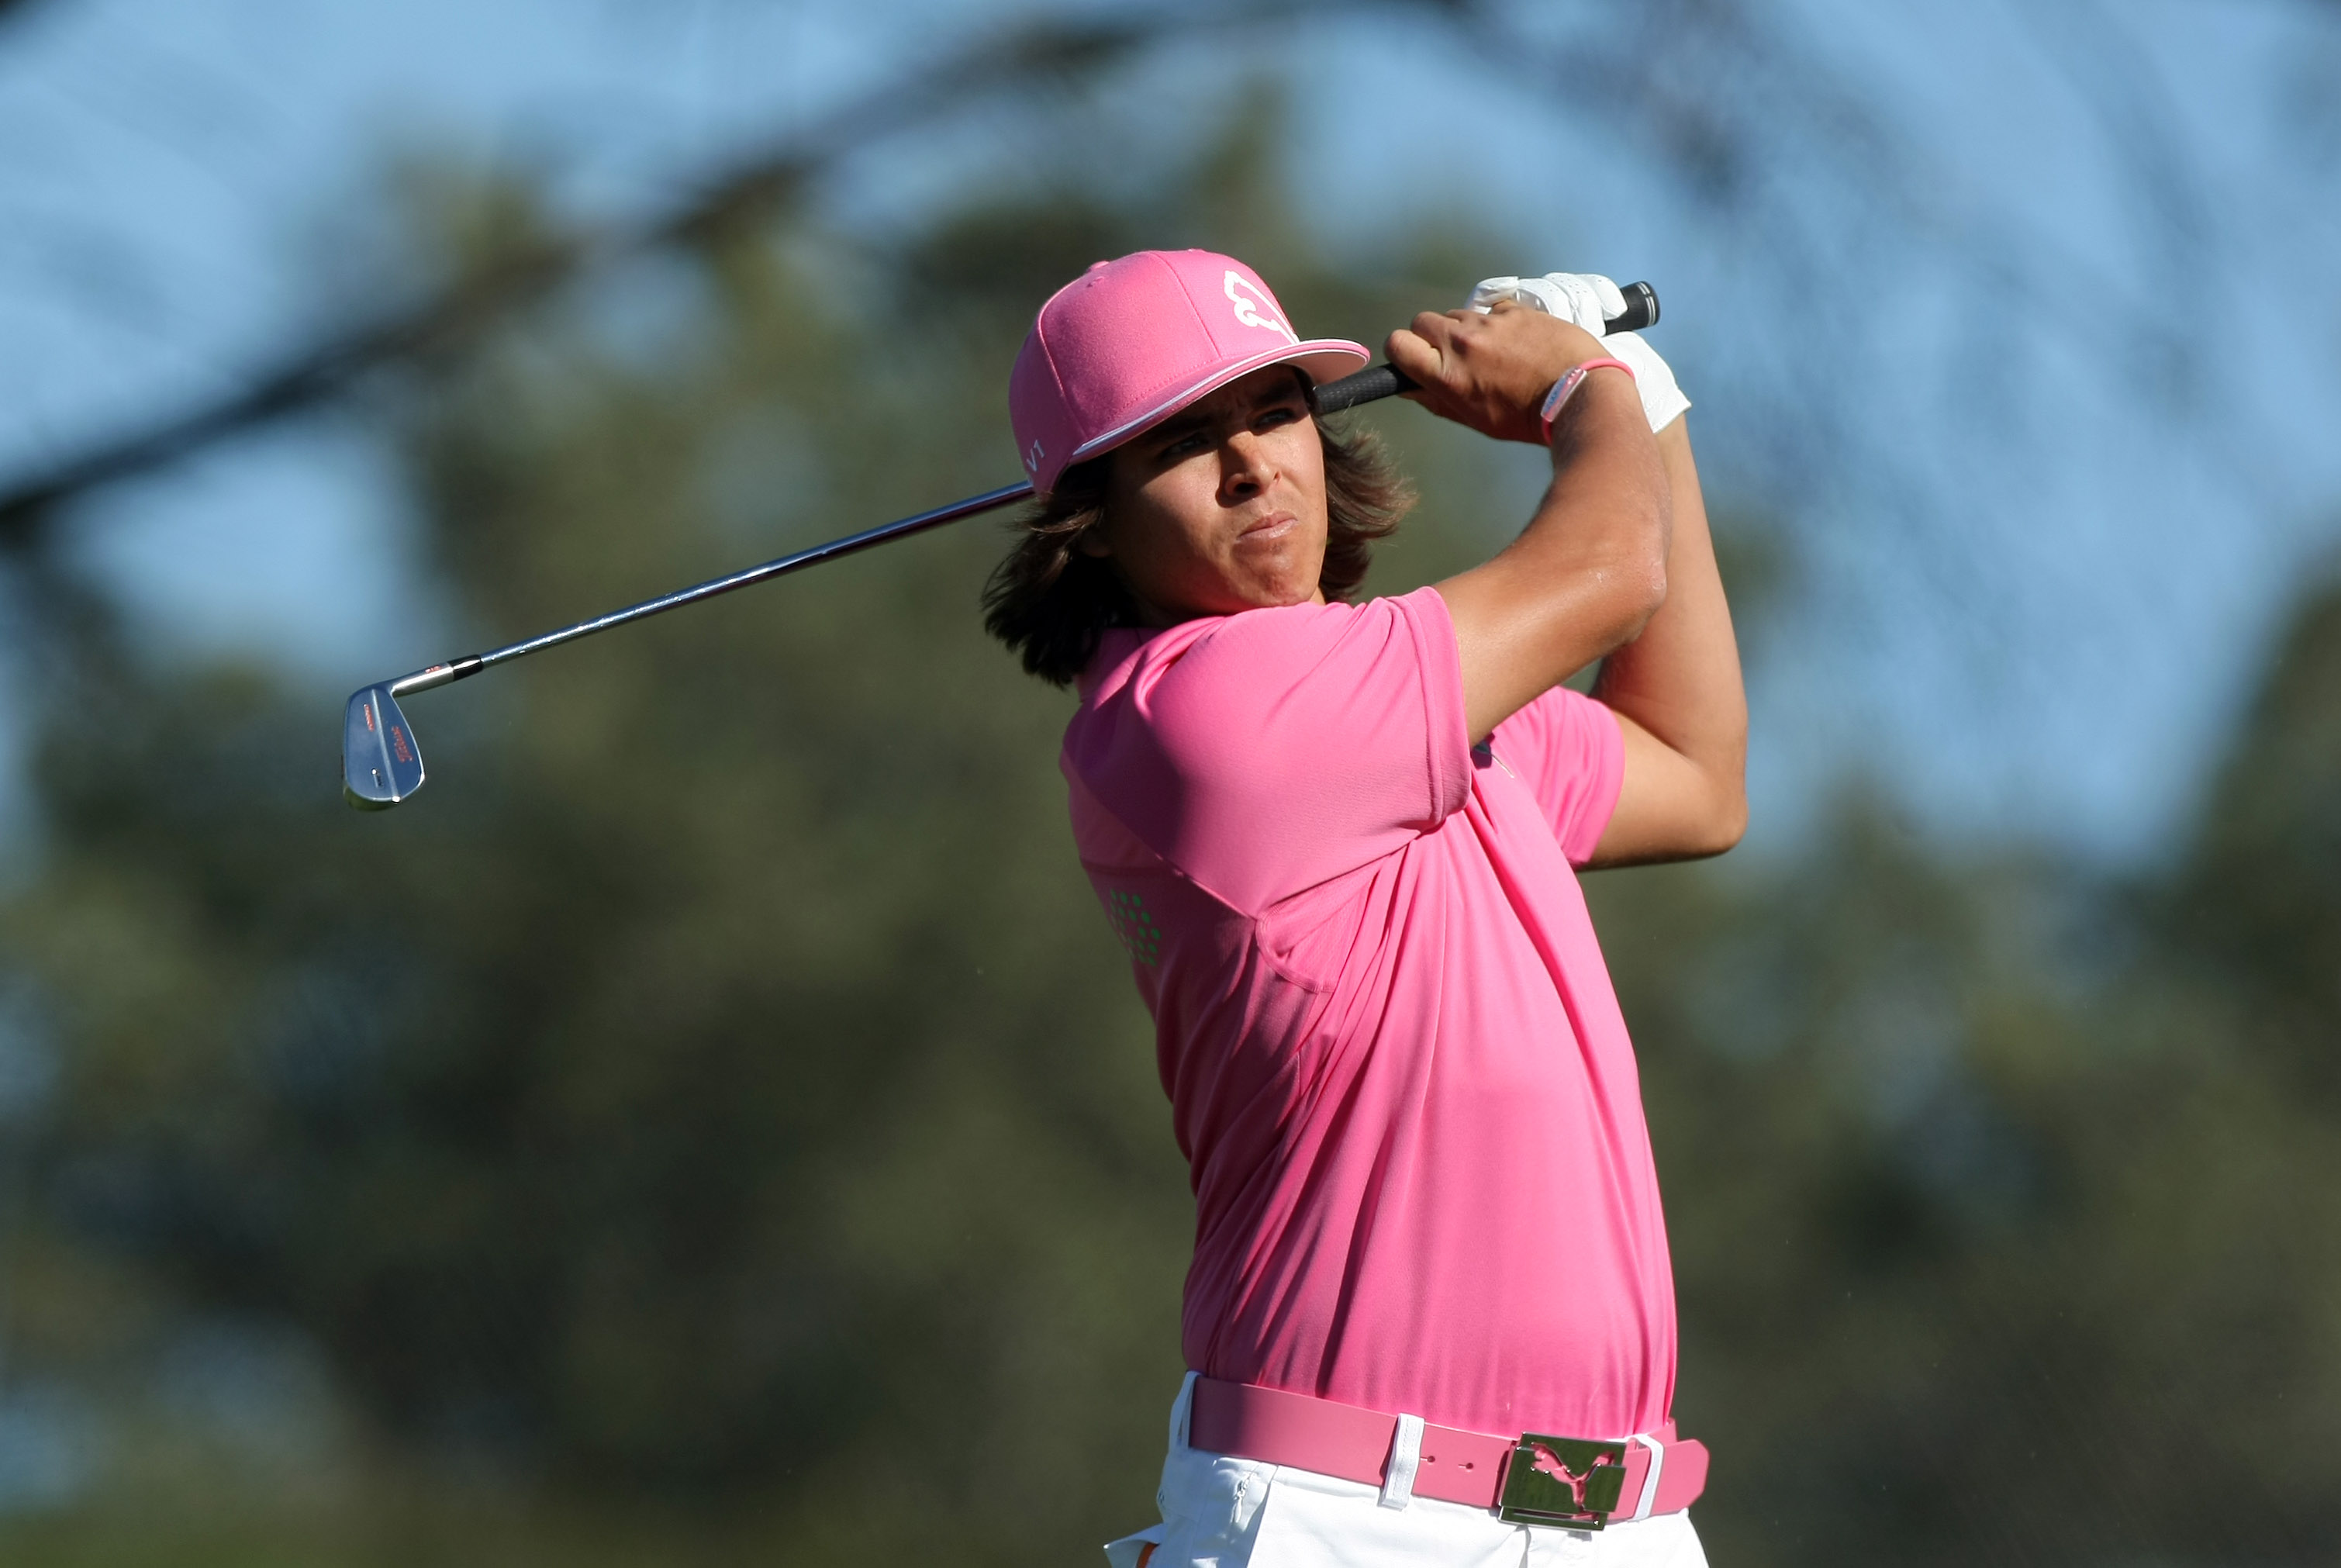 LA JOLLA, CA - JANUARY 27: Rickie Fowler tees off the 17th hole during the first round of the Farmers Insurance Open at Torrey Pines on January 27, 2011 in La Jolla, California. (Photo by Donald Miralle/Getty Images)